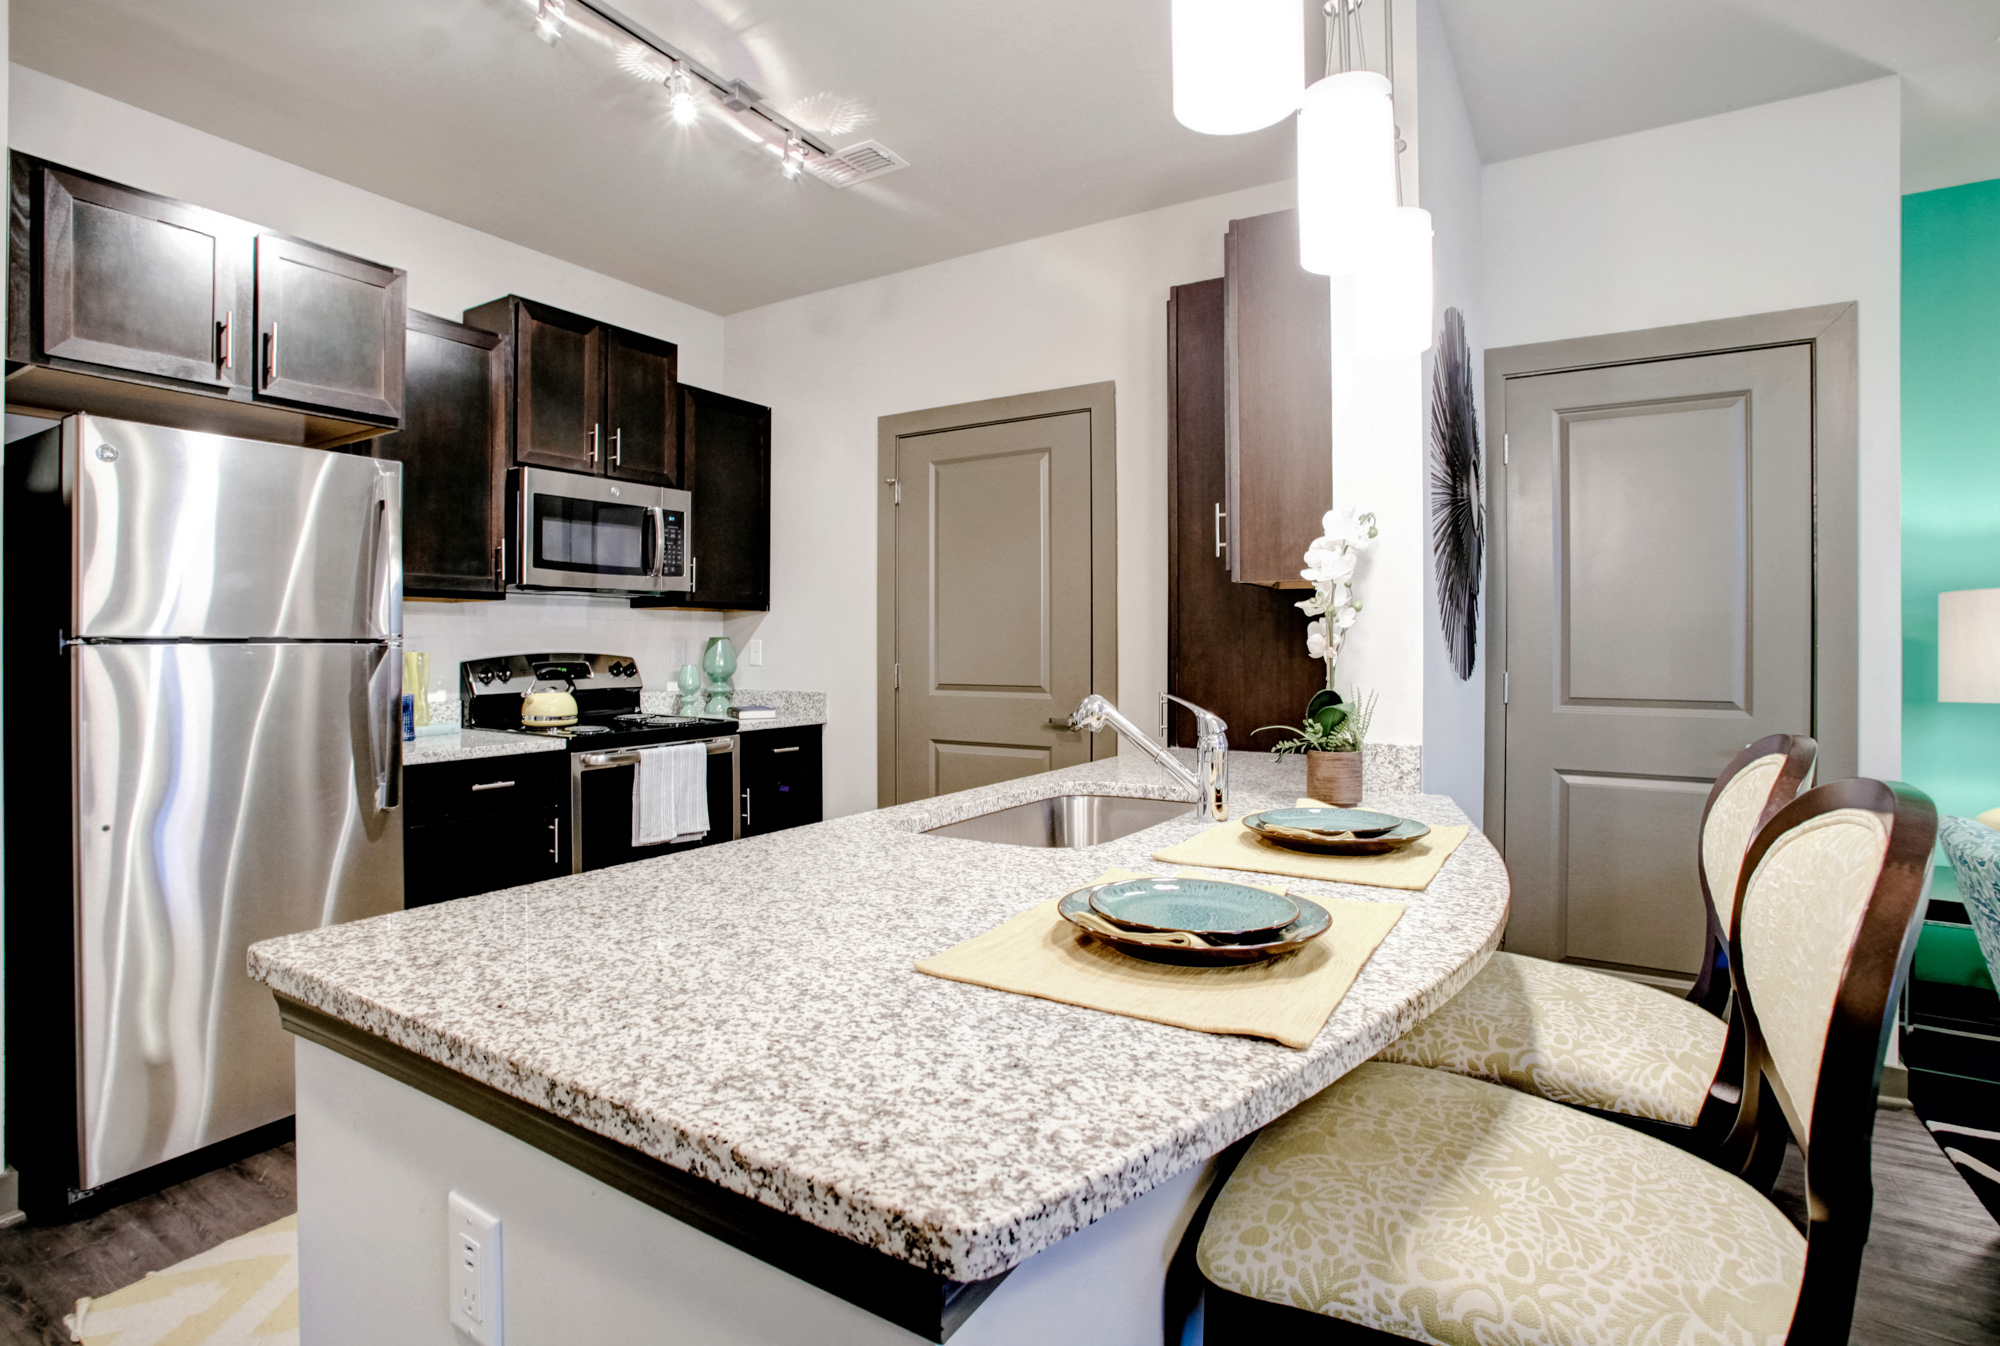 A kitchen with brown cabinets and stainless steel appliances at Park 9 apartments near Atlanta, GA.